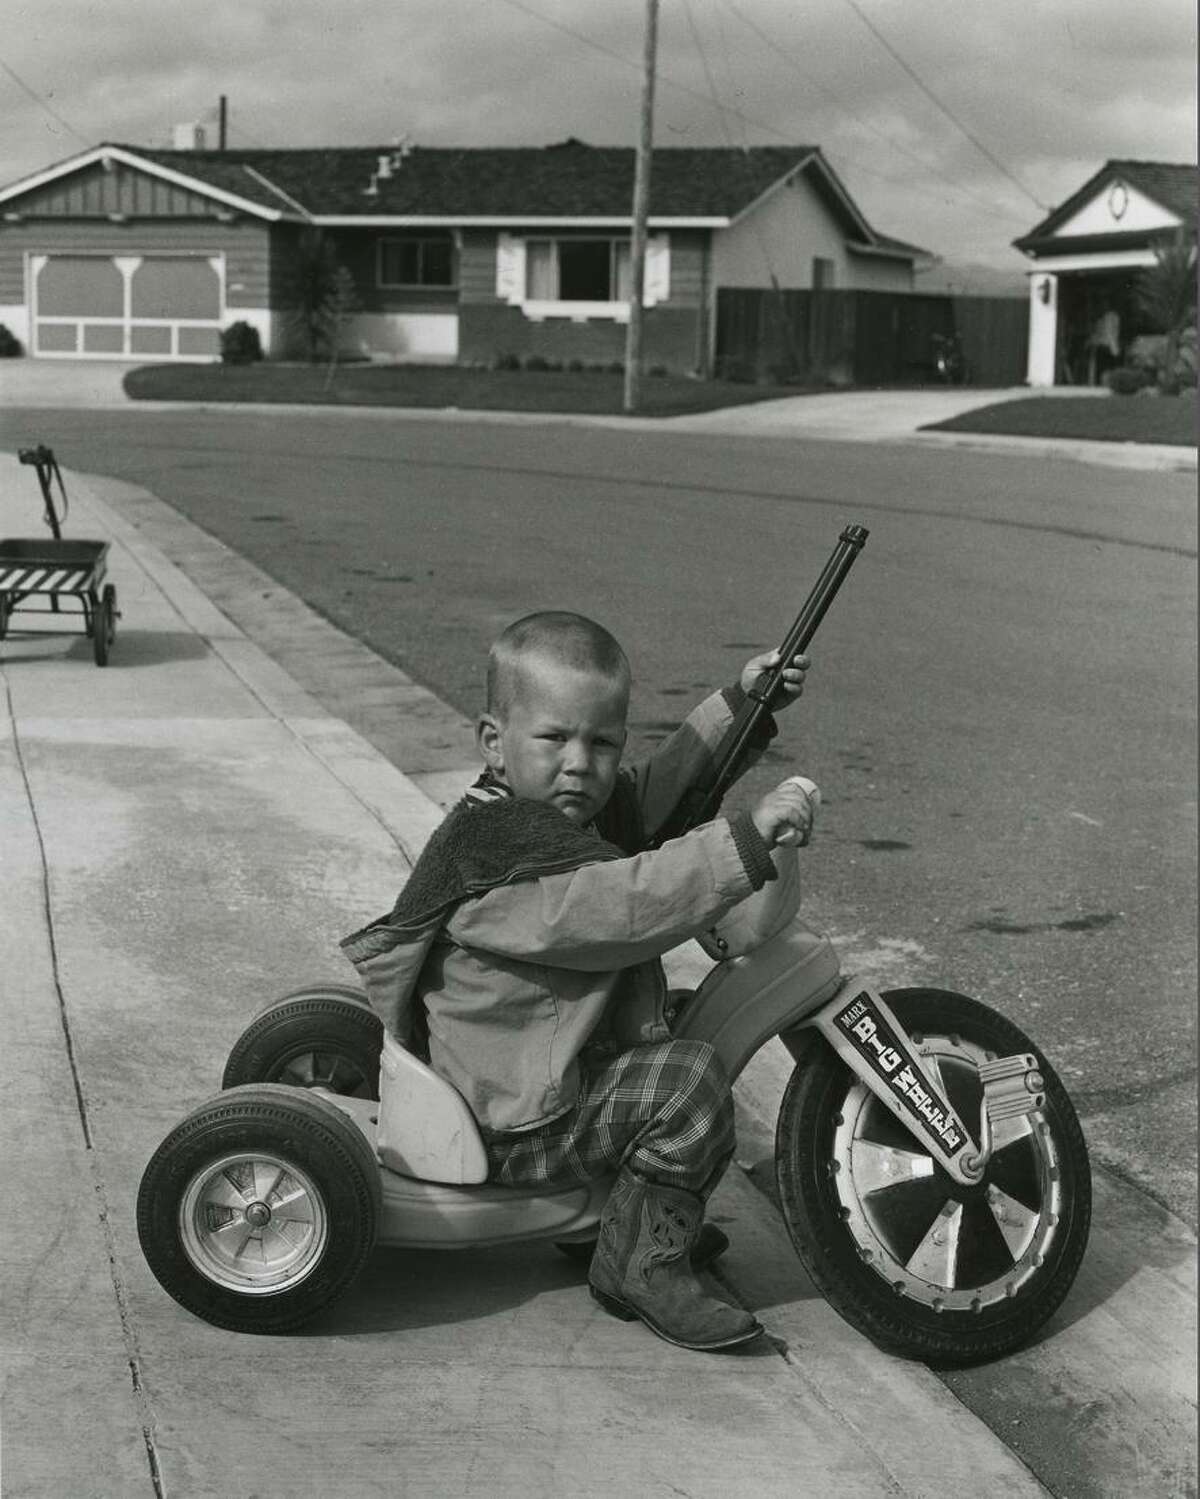 The mother of Richie Ferguson defended the 4-year-old’s playing with guns in a 1971 photo from Bill Owens’ book published in 1972, “Suburbia.”